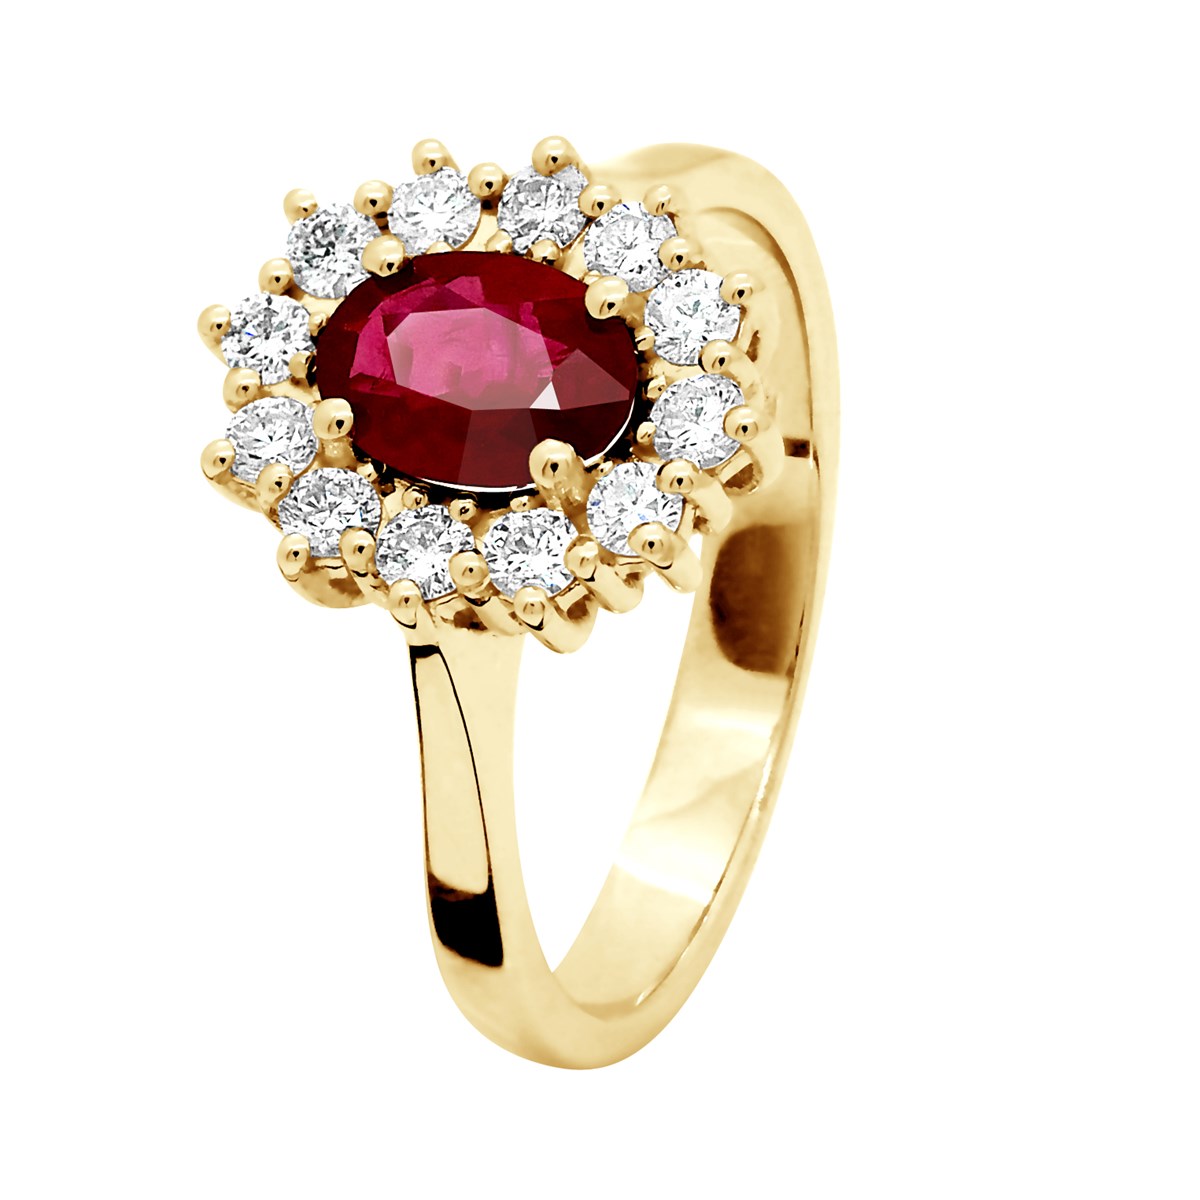 Bague Marquise RUBIS 0,95 Cts Diamants 0,36 Cts Or Jaune 18 Carats